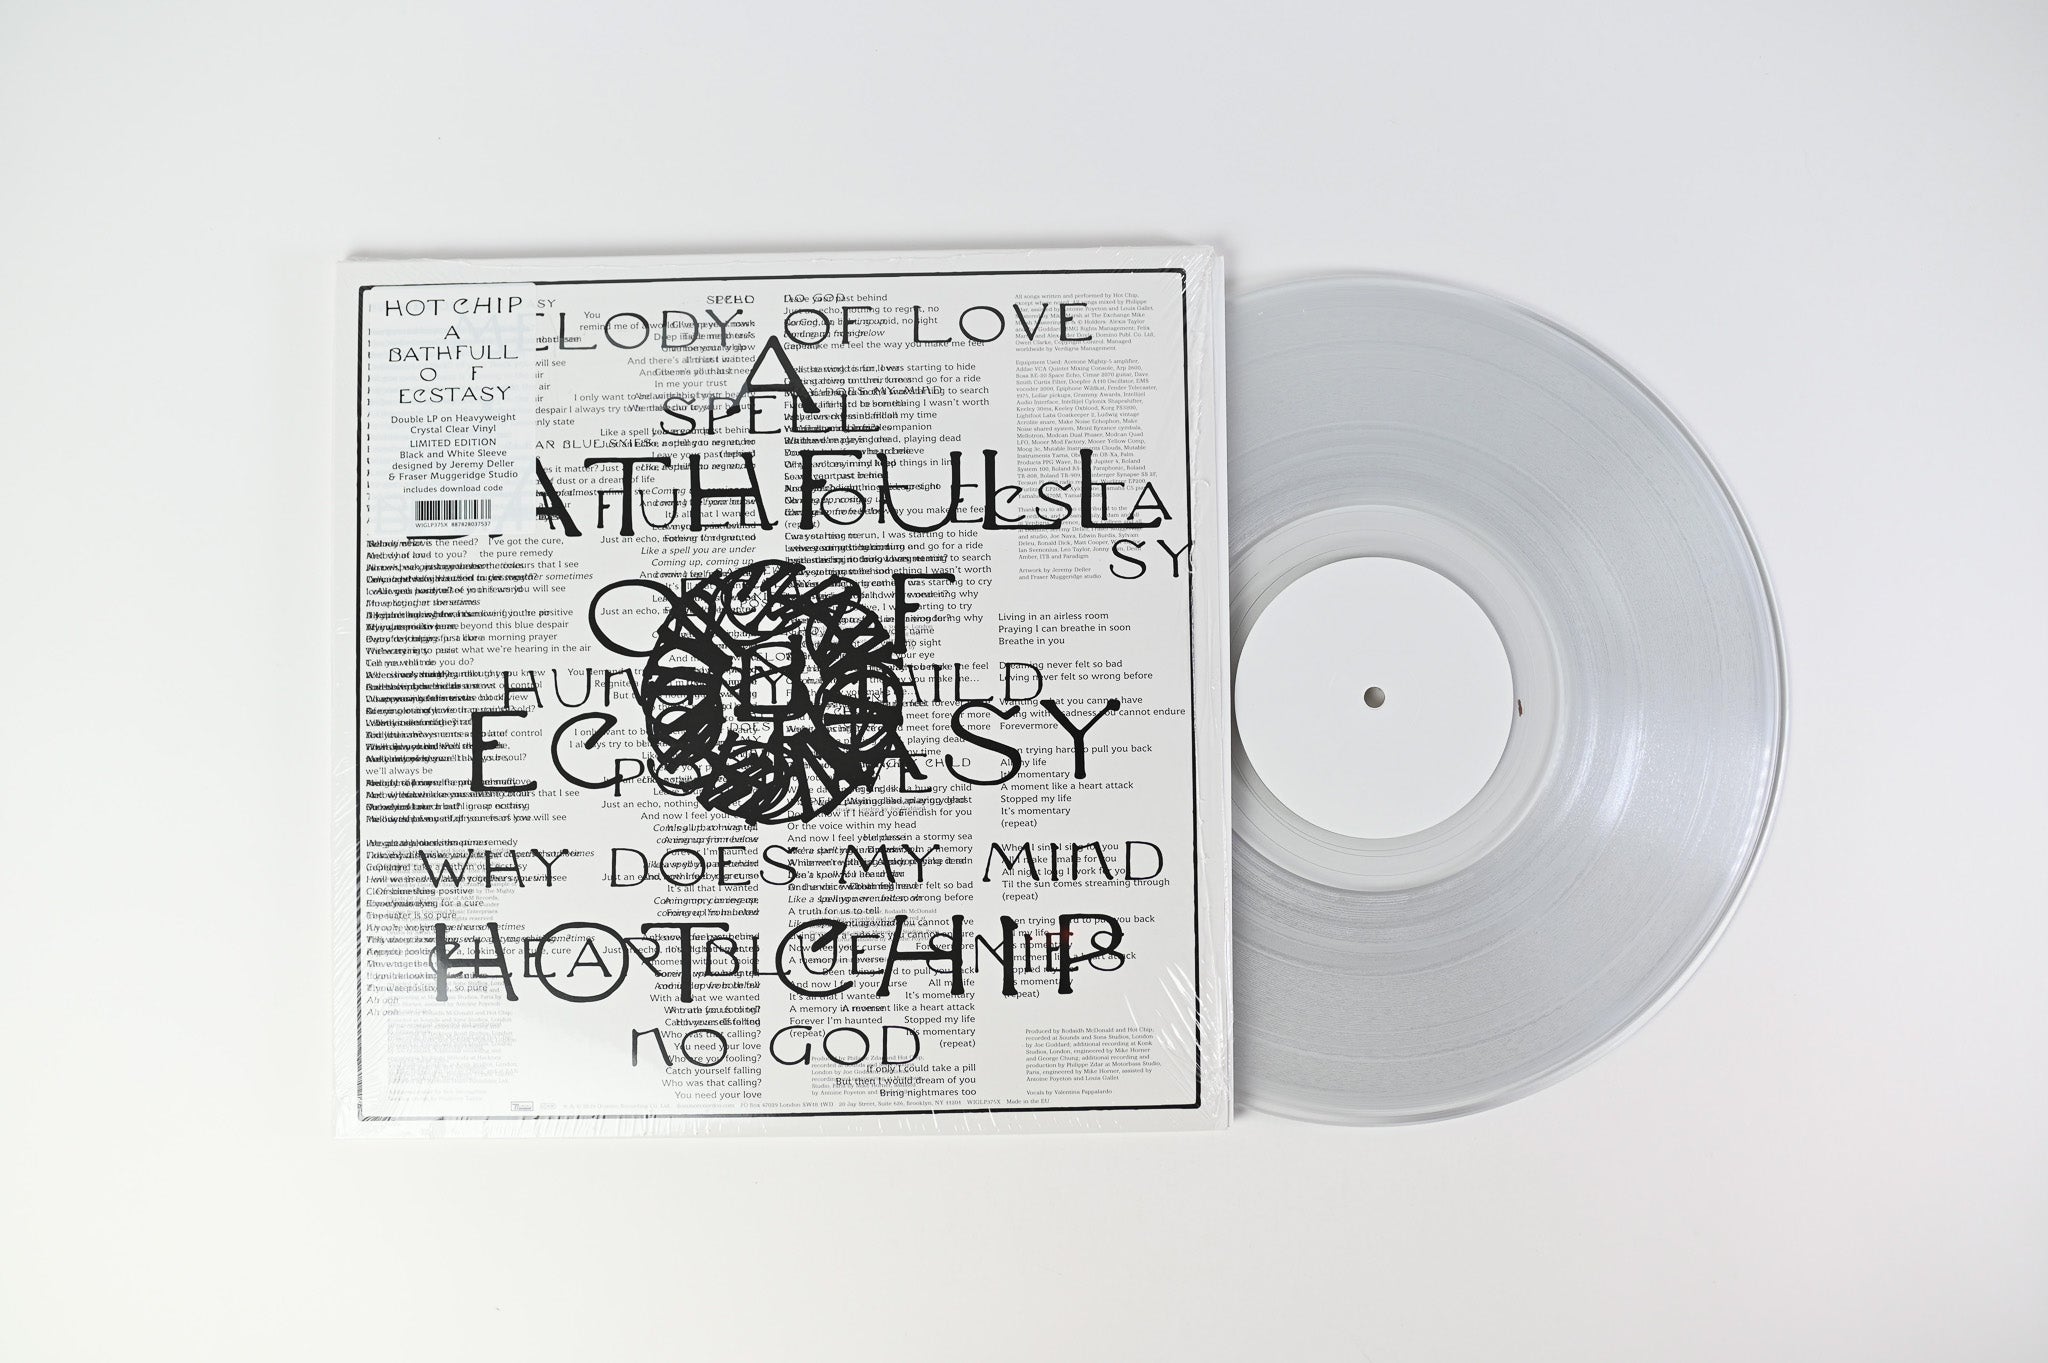 Hot Chip - A Bath Full Of Ecstasy on Domino Ltd White Label Crystal Clear